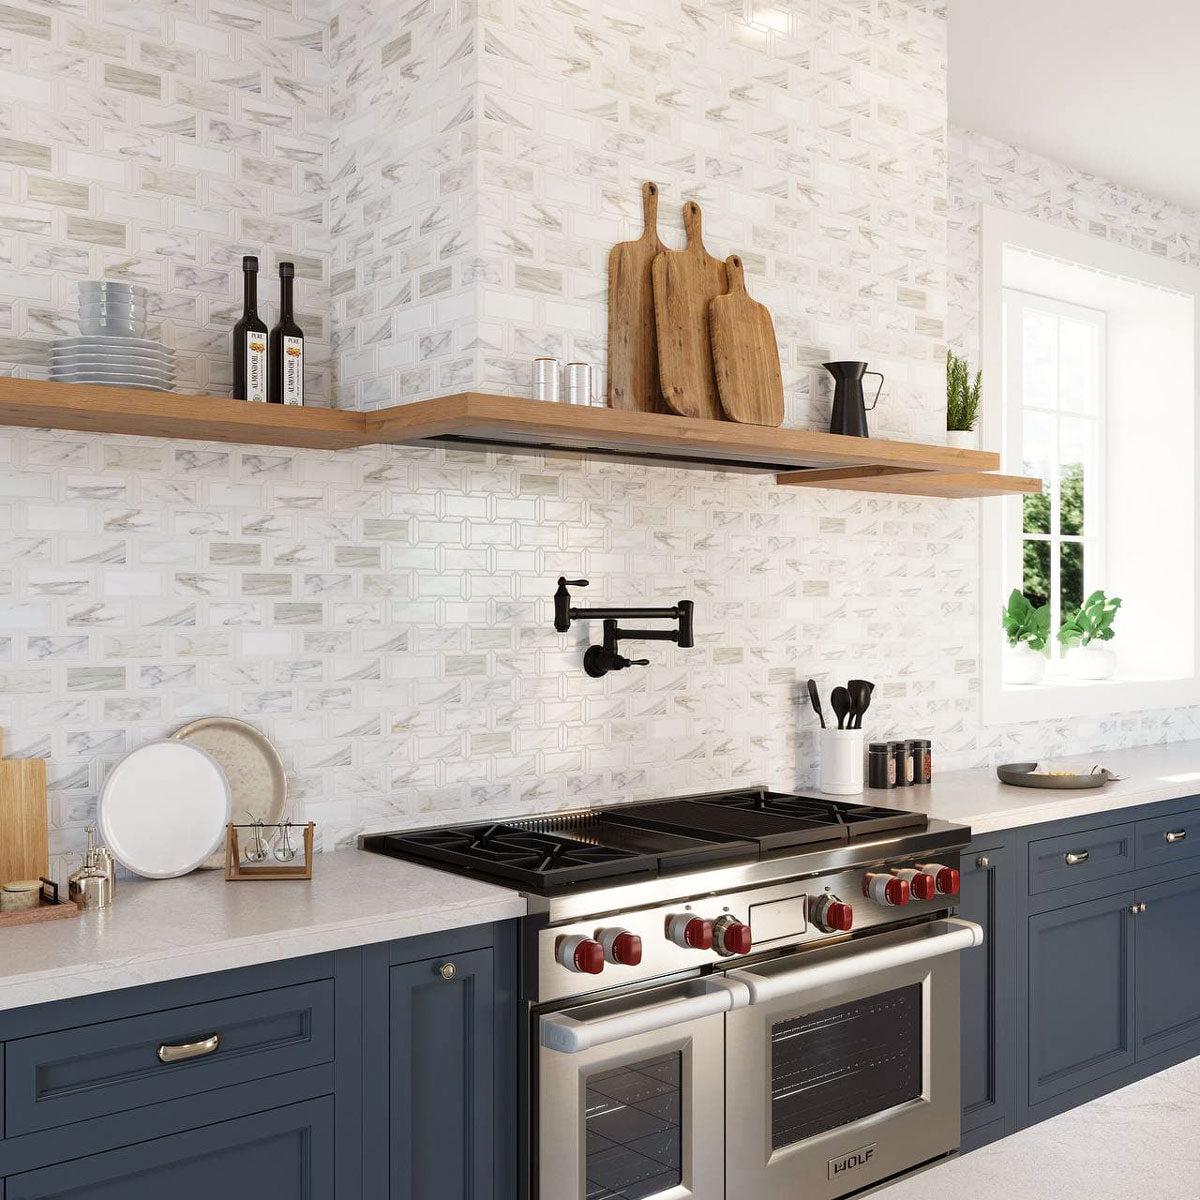 Elevate your kitchen with a tile range good in Calacatta Gold Marble bricks